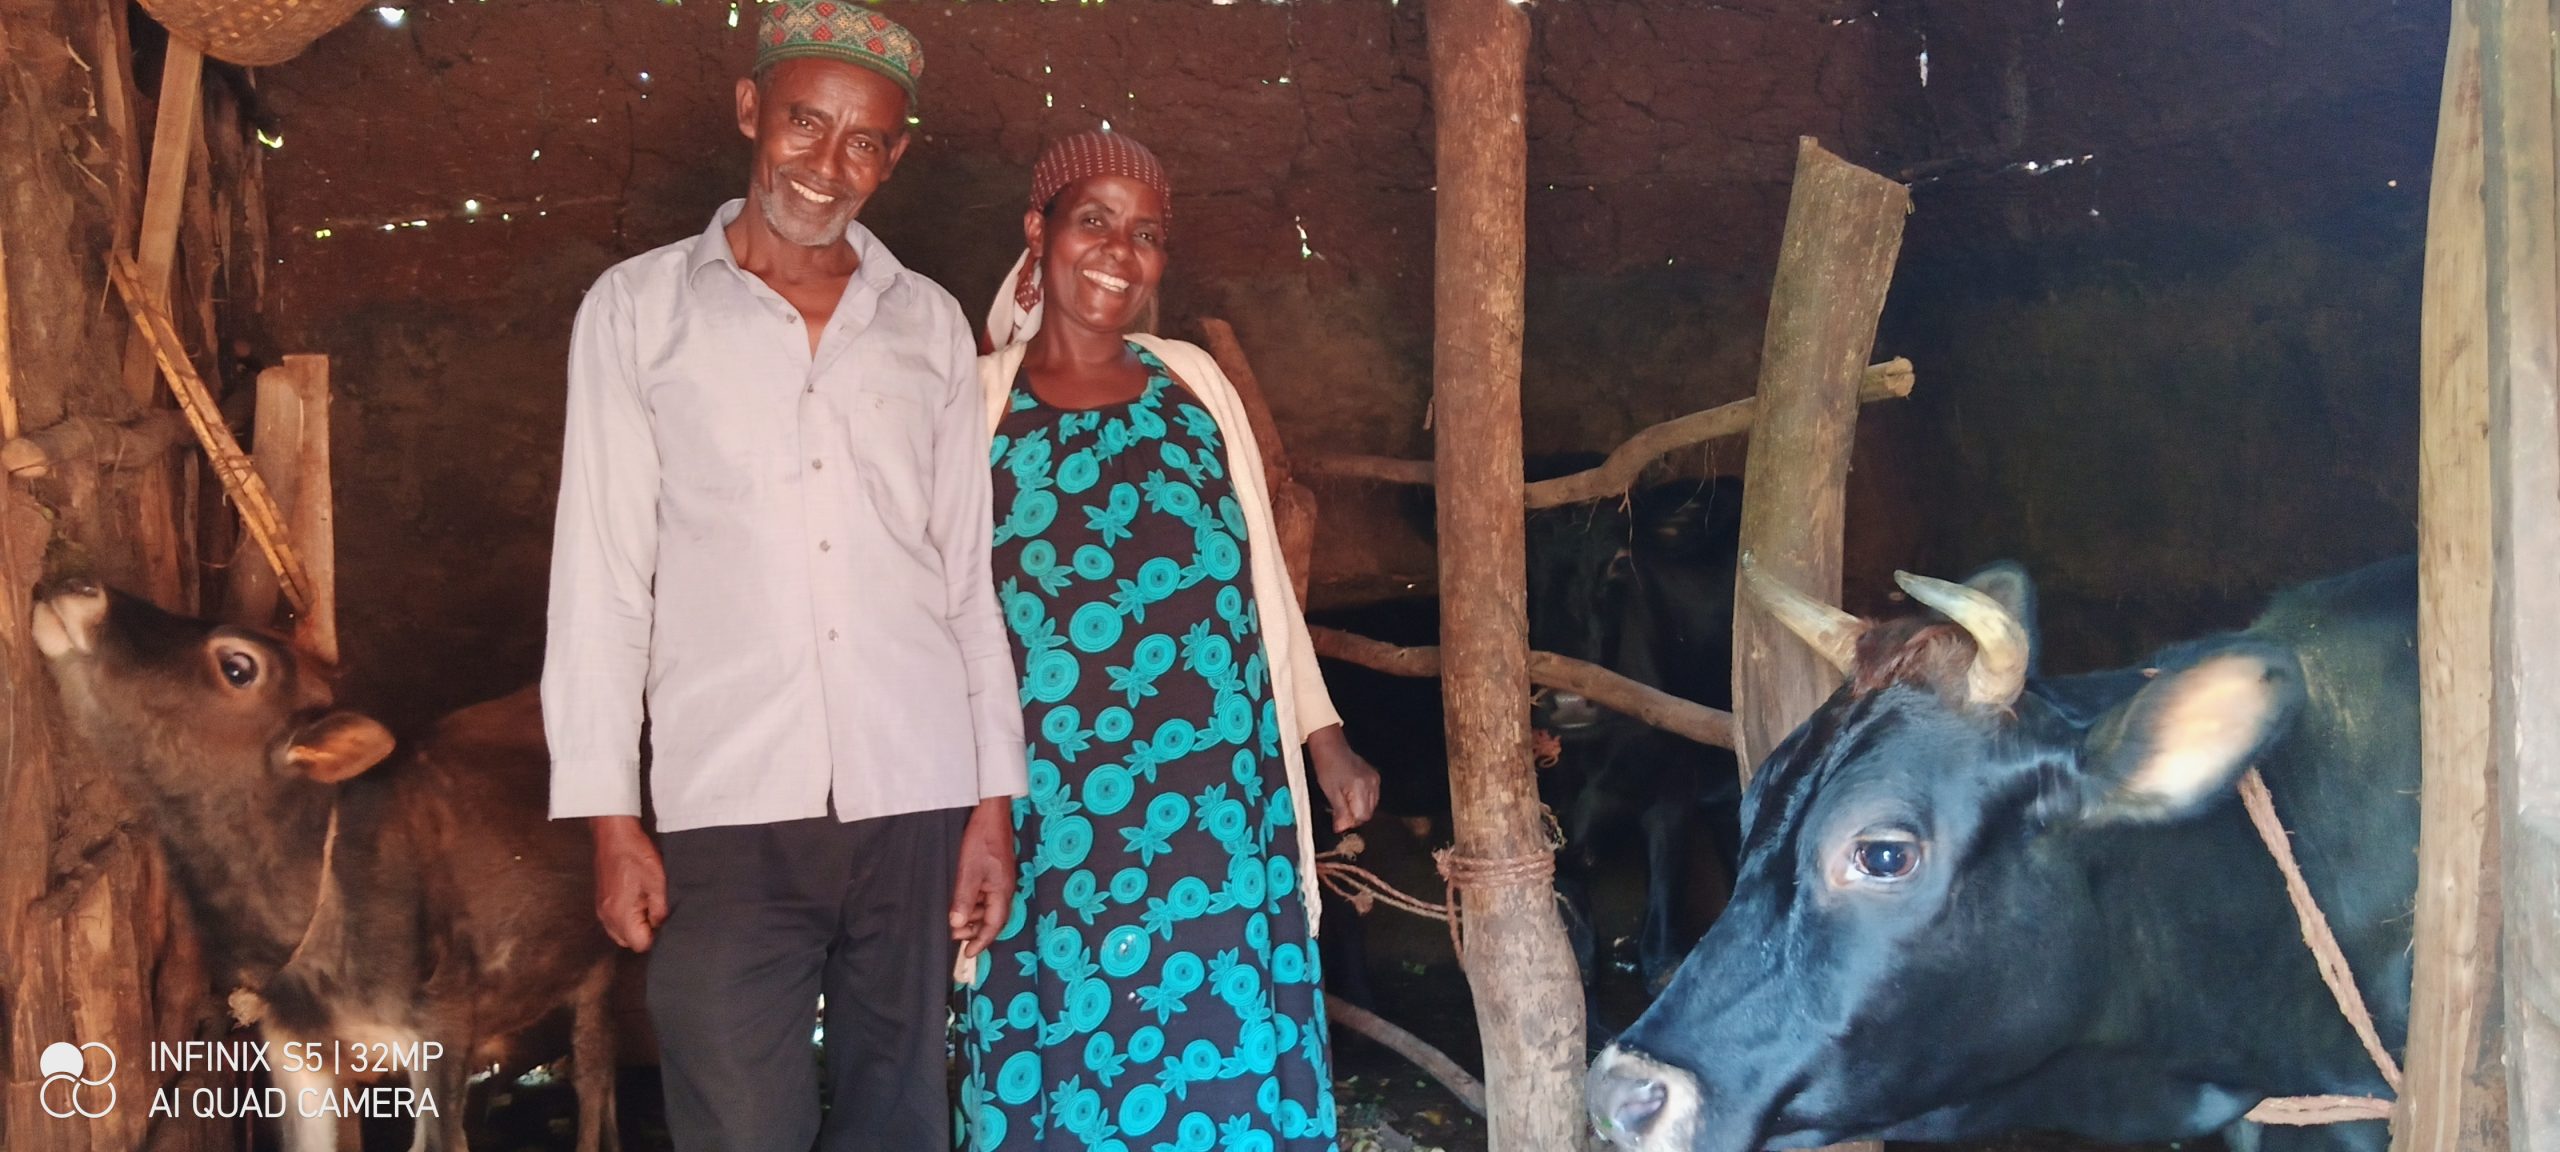 using better farm practices helped these two coffee farmers pose with the cows they purchased with their coffee income.